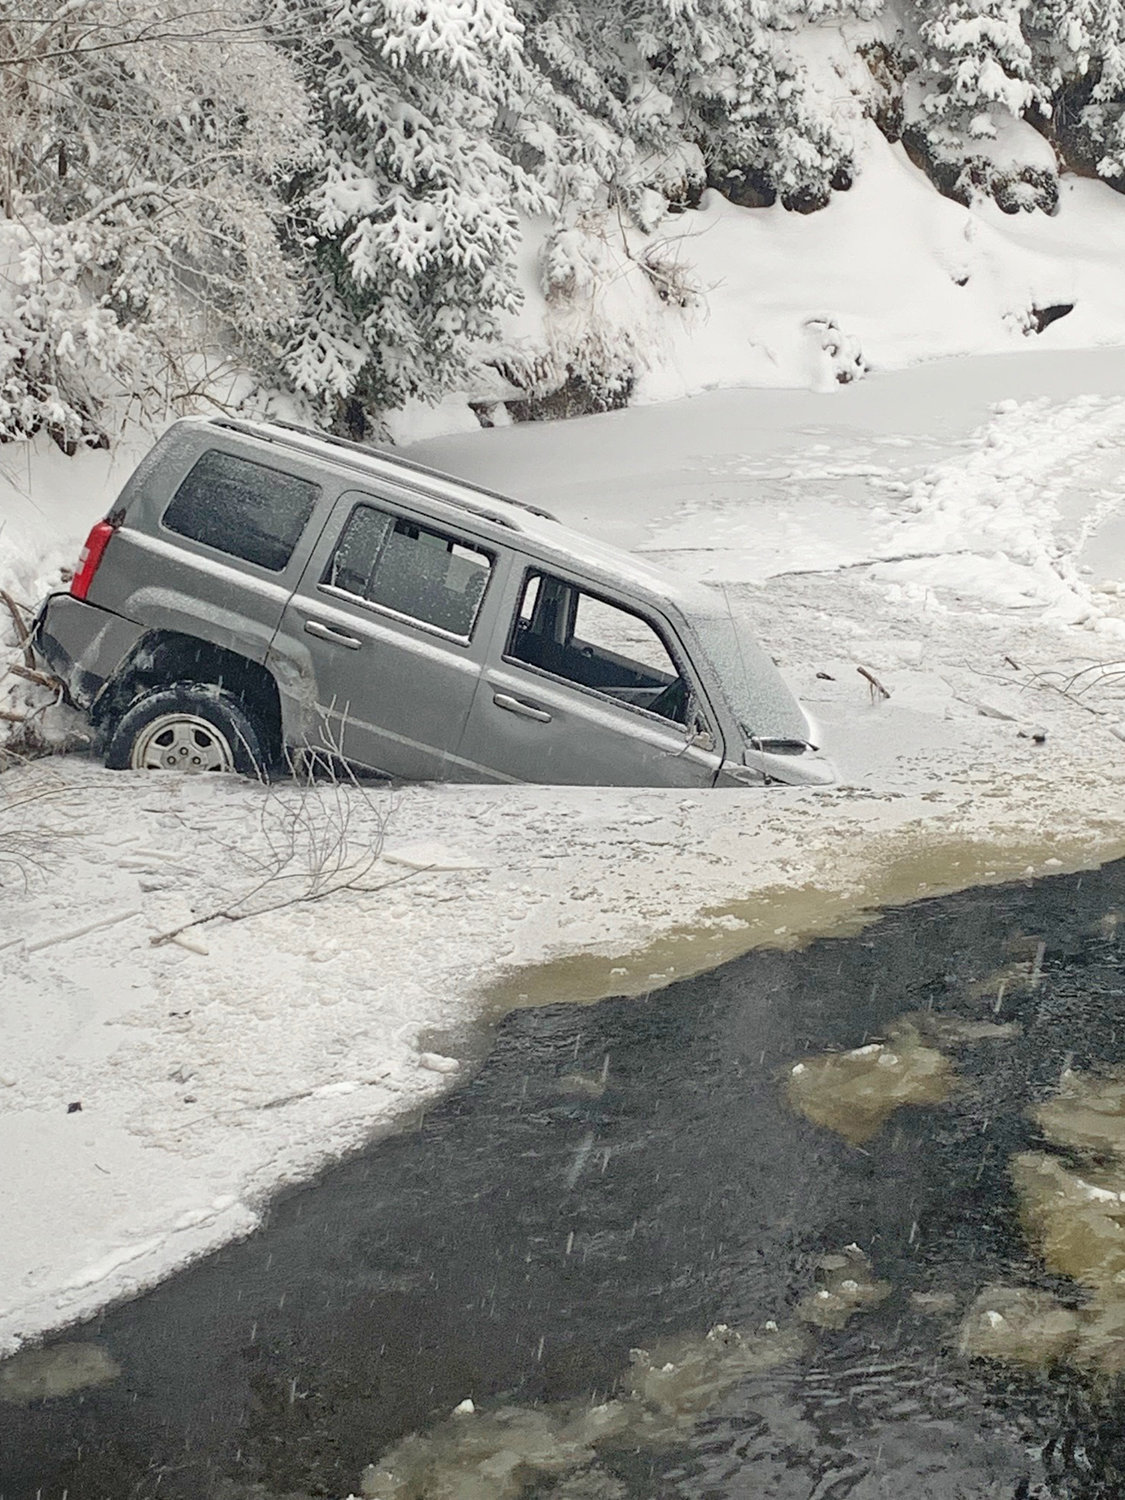 Three people were able to escape after this Jeep crashed into the Moose River in the Town of Webb at about 2 a.m. Sunday, according to the Webb Police Department.